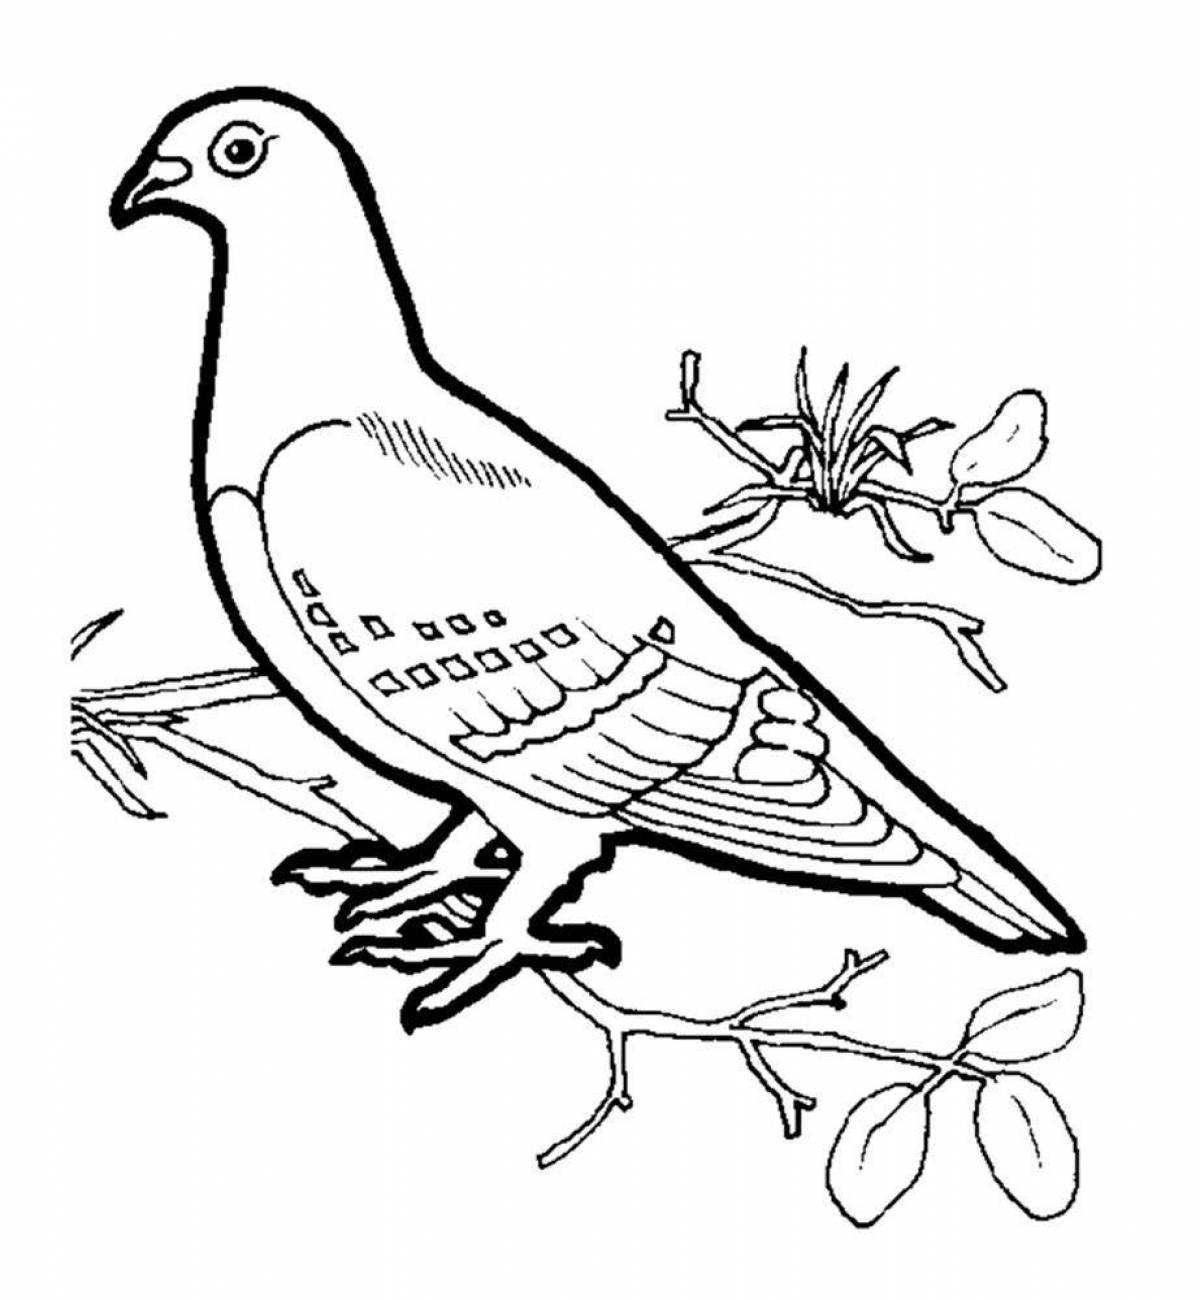 Coloring pages with cute birds for children 4-5 years old